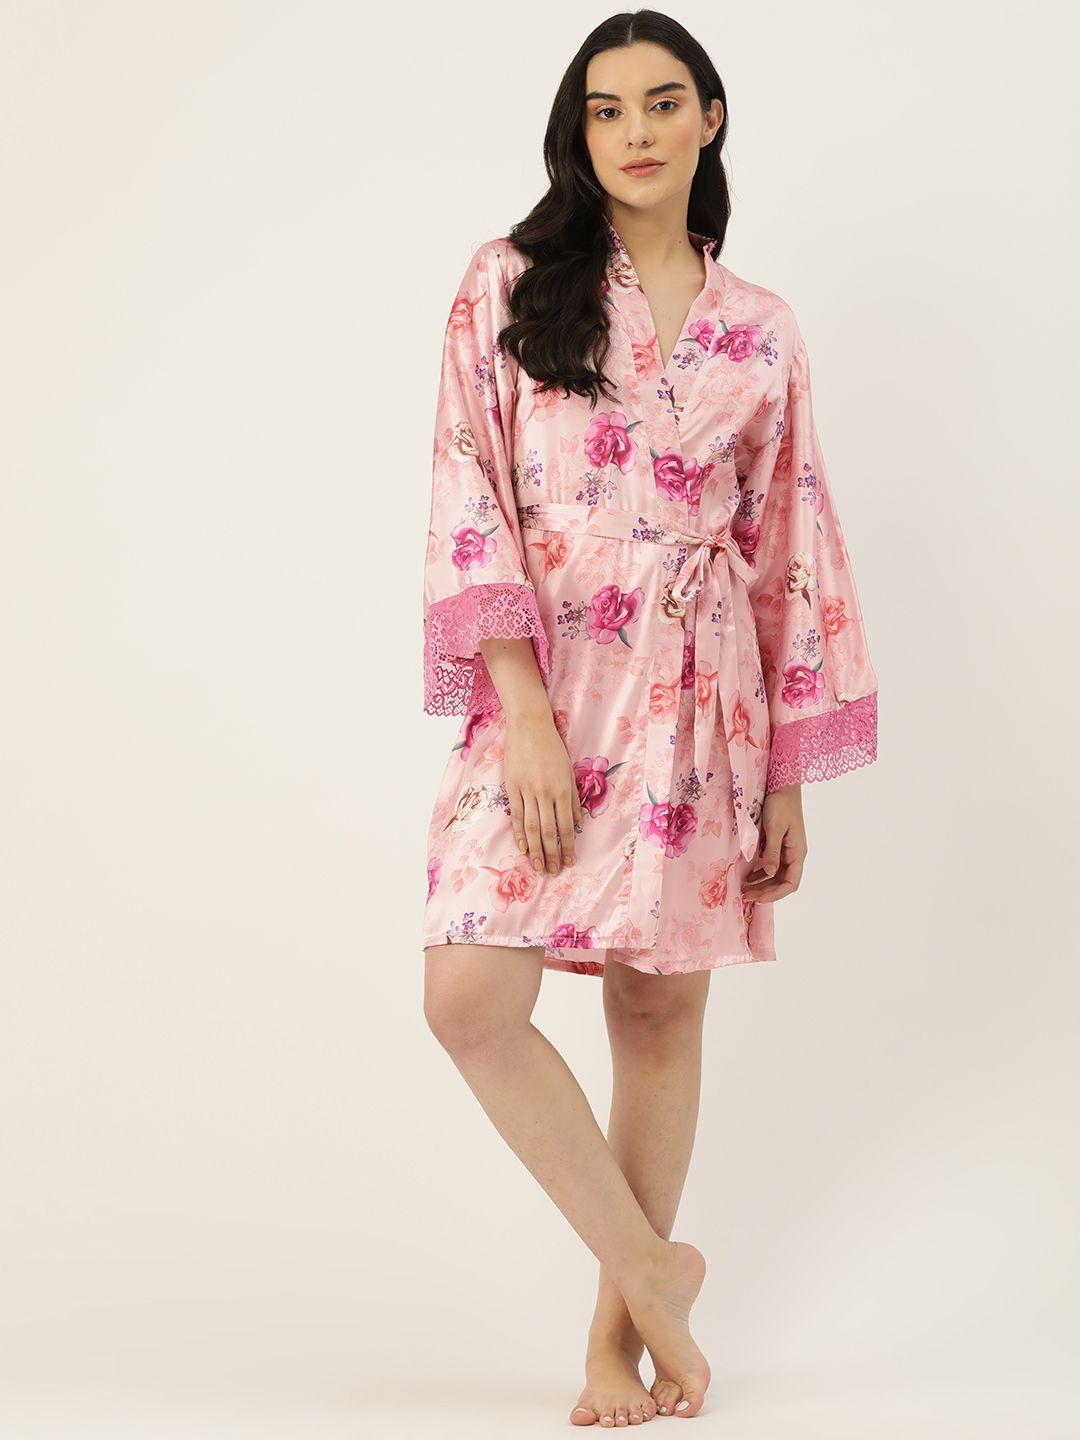 ms.lingies women printed satin robe with lace detail